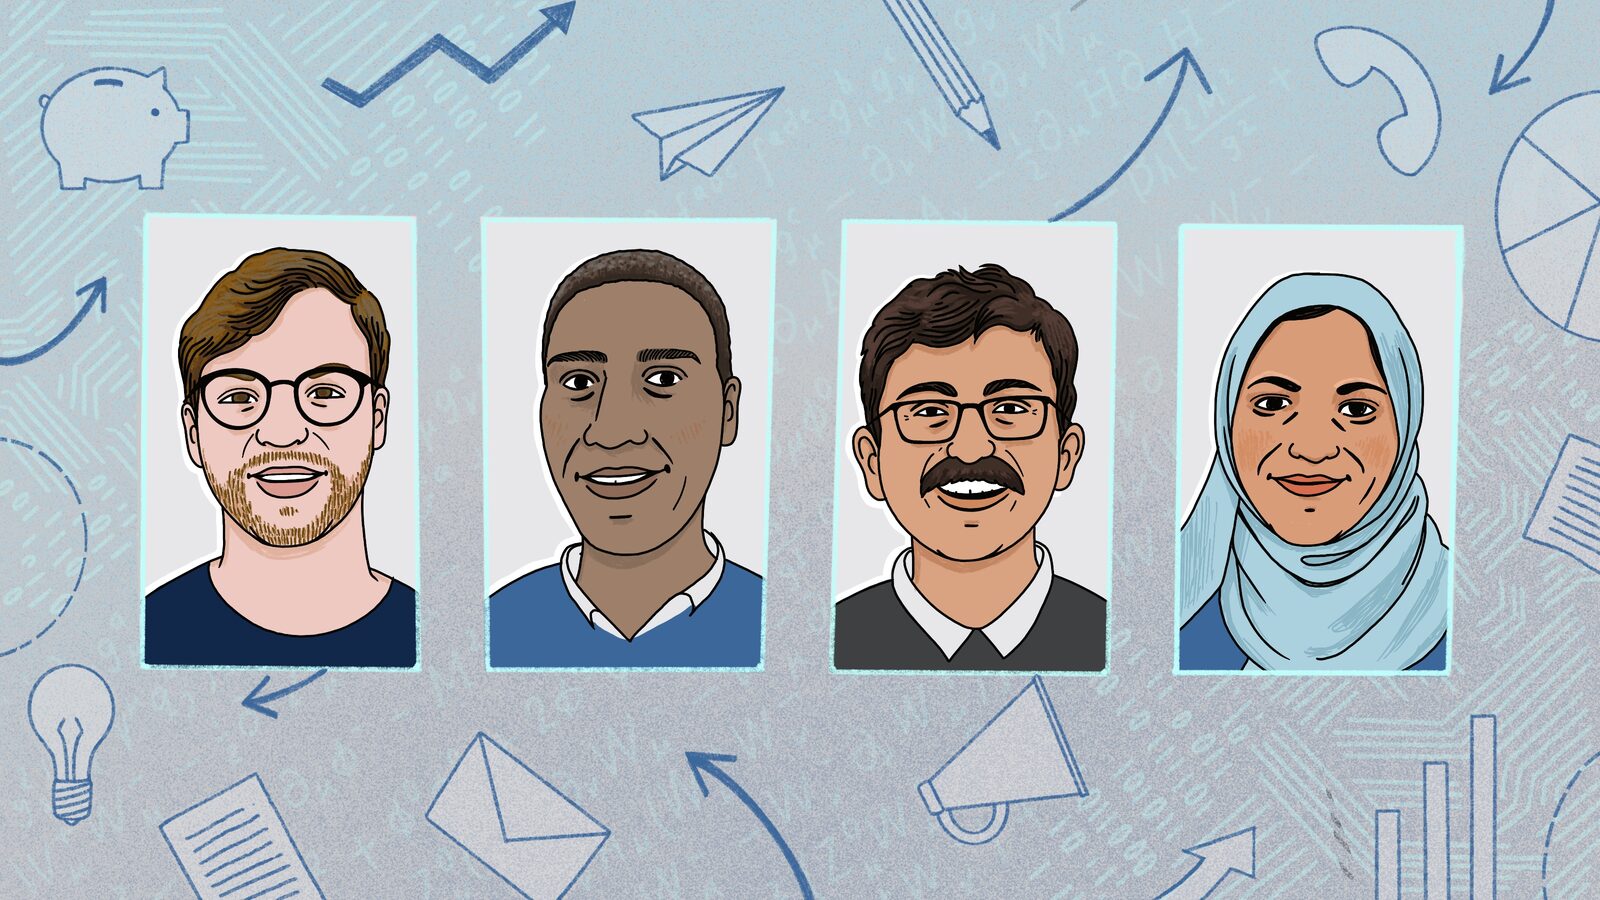 Illustrated portraits of people referenced in the article